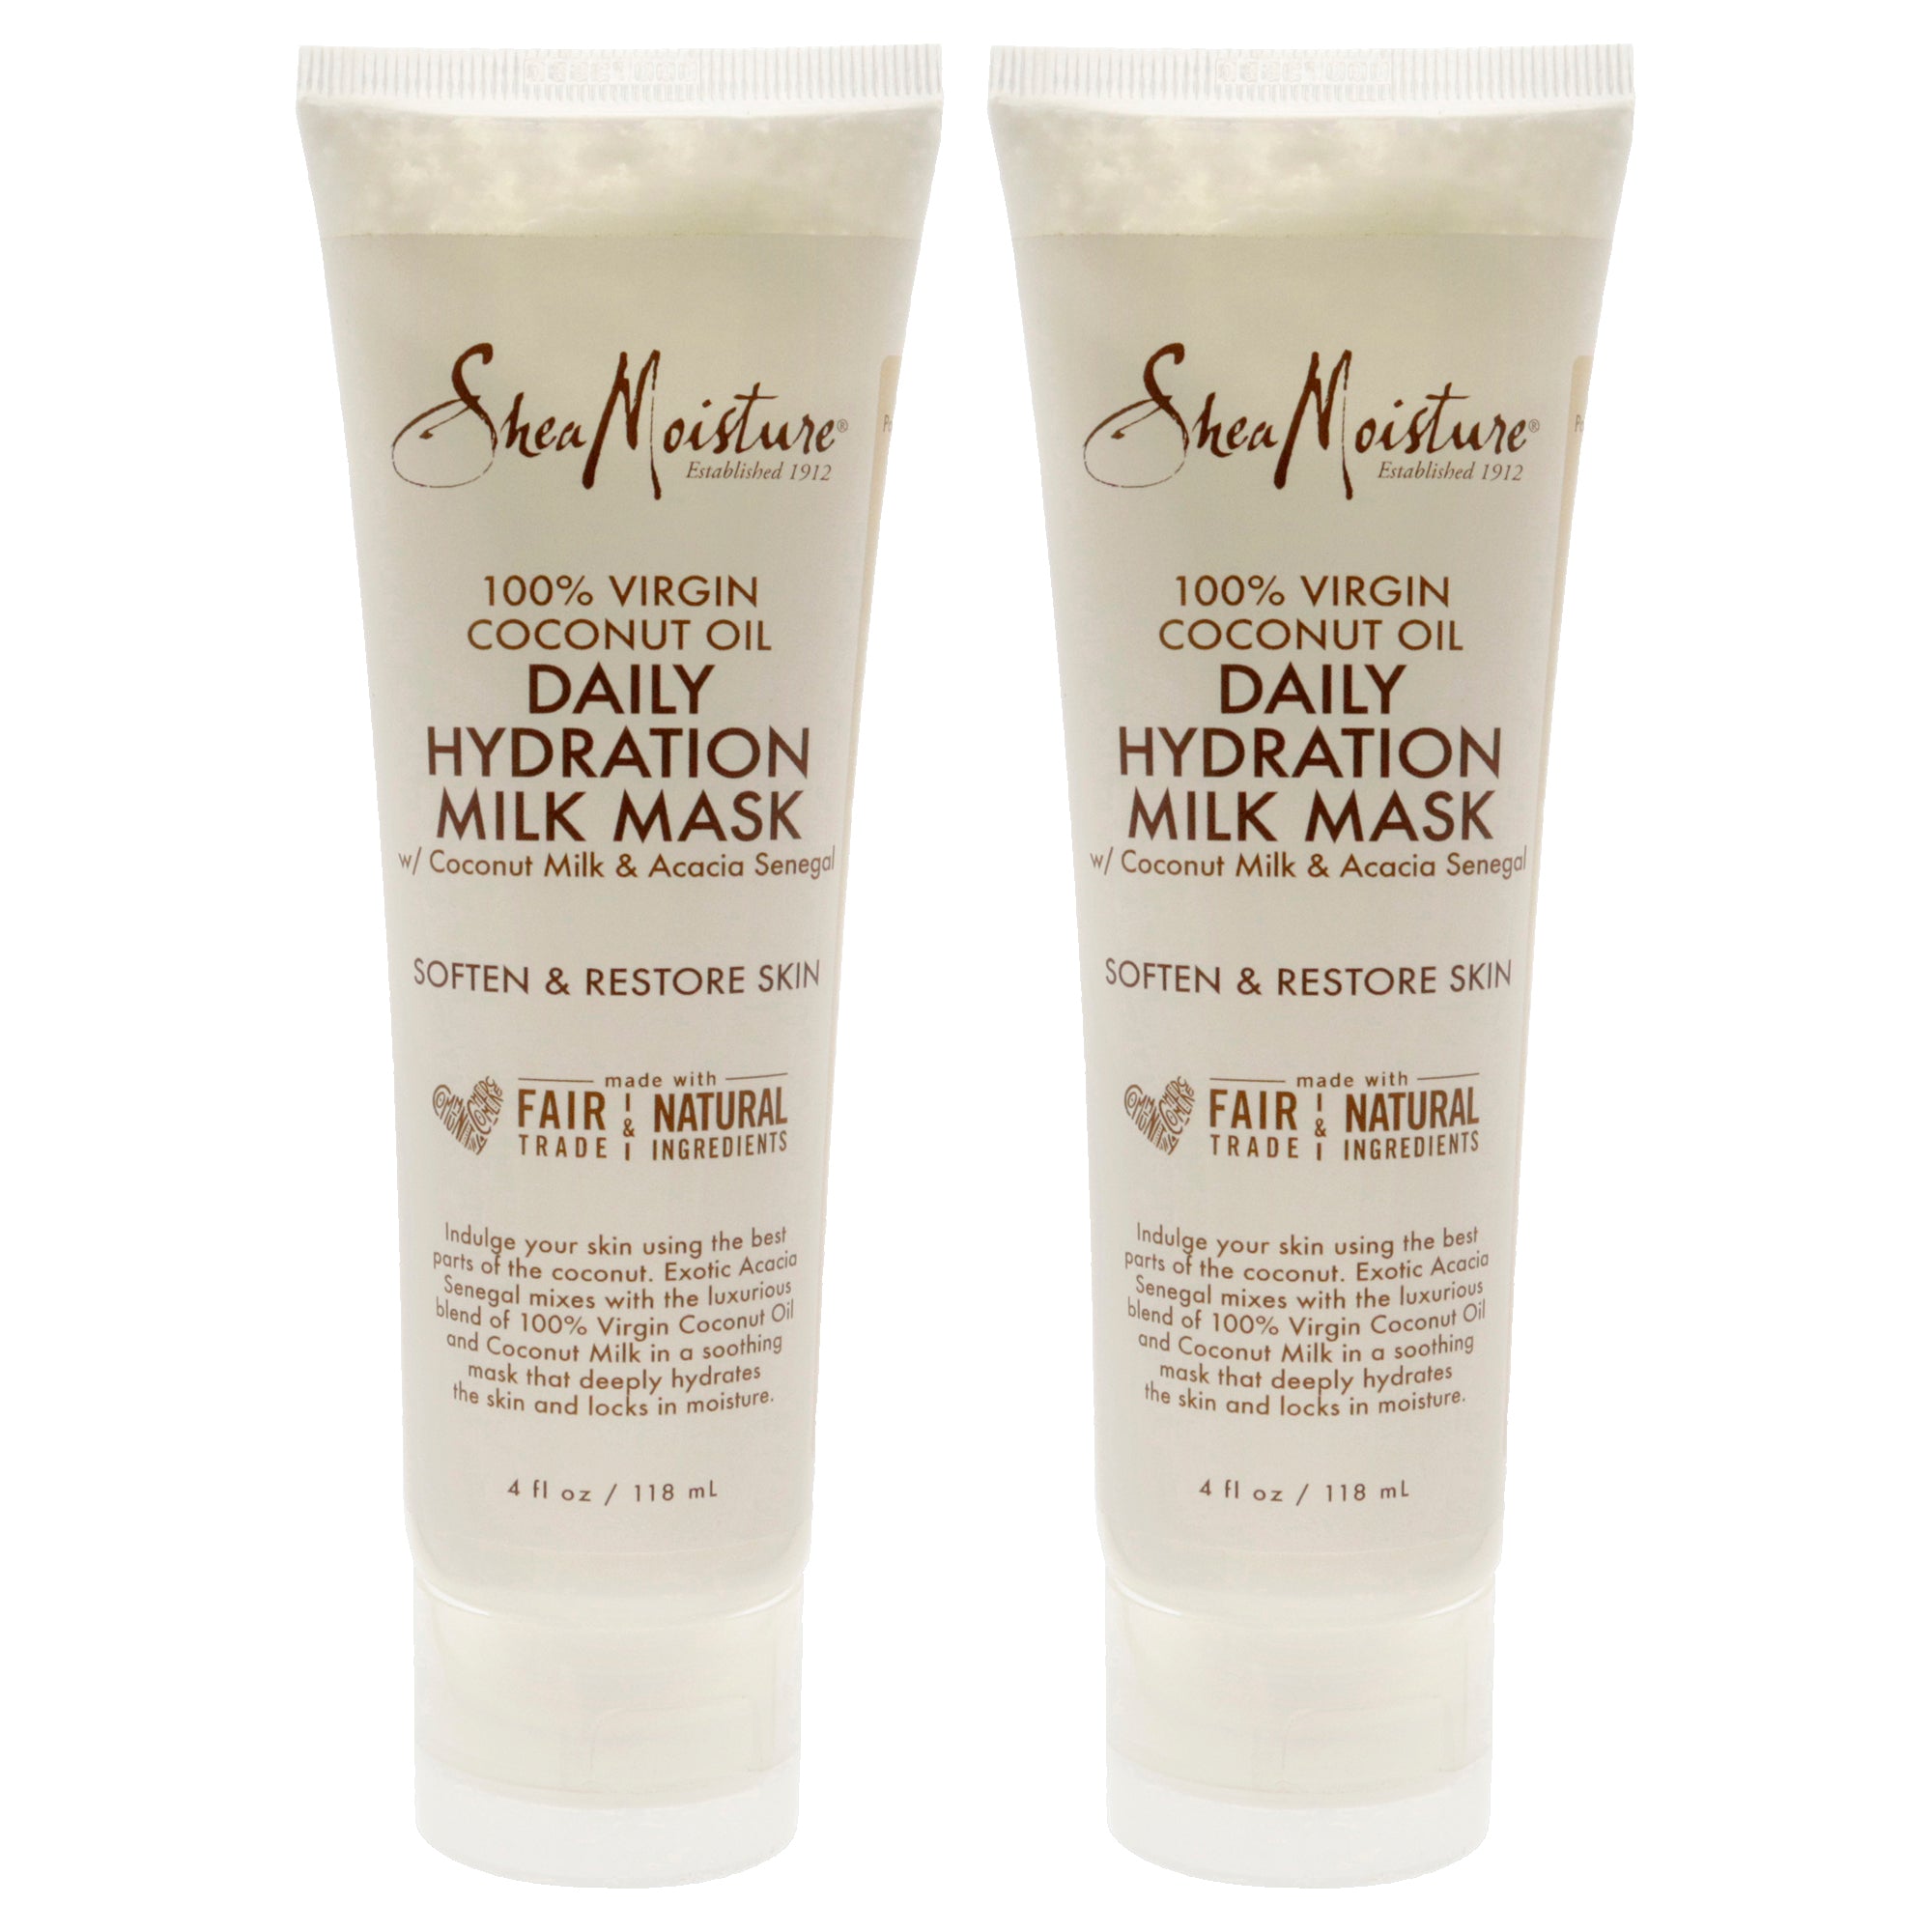 100% Virgin Coconut Oil Daily Hydration Milk Mask - Pack of 2 by Shea Moisture for Unisex - 4 oz Mask